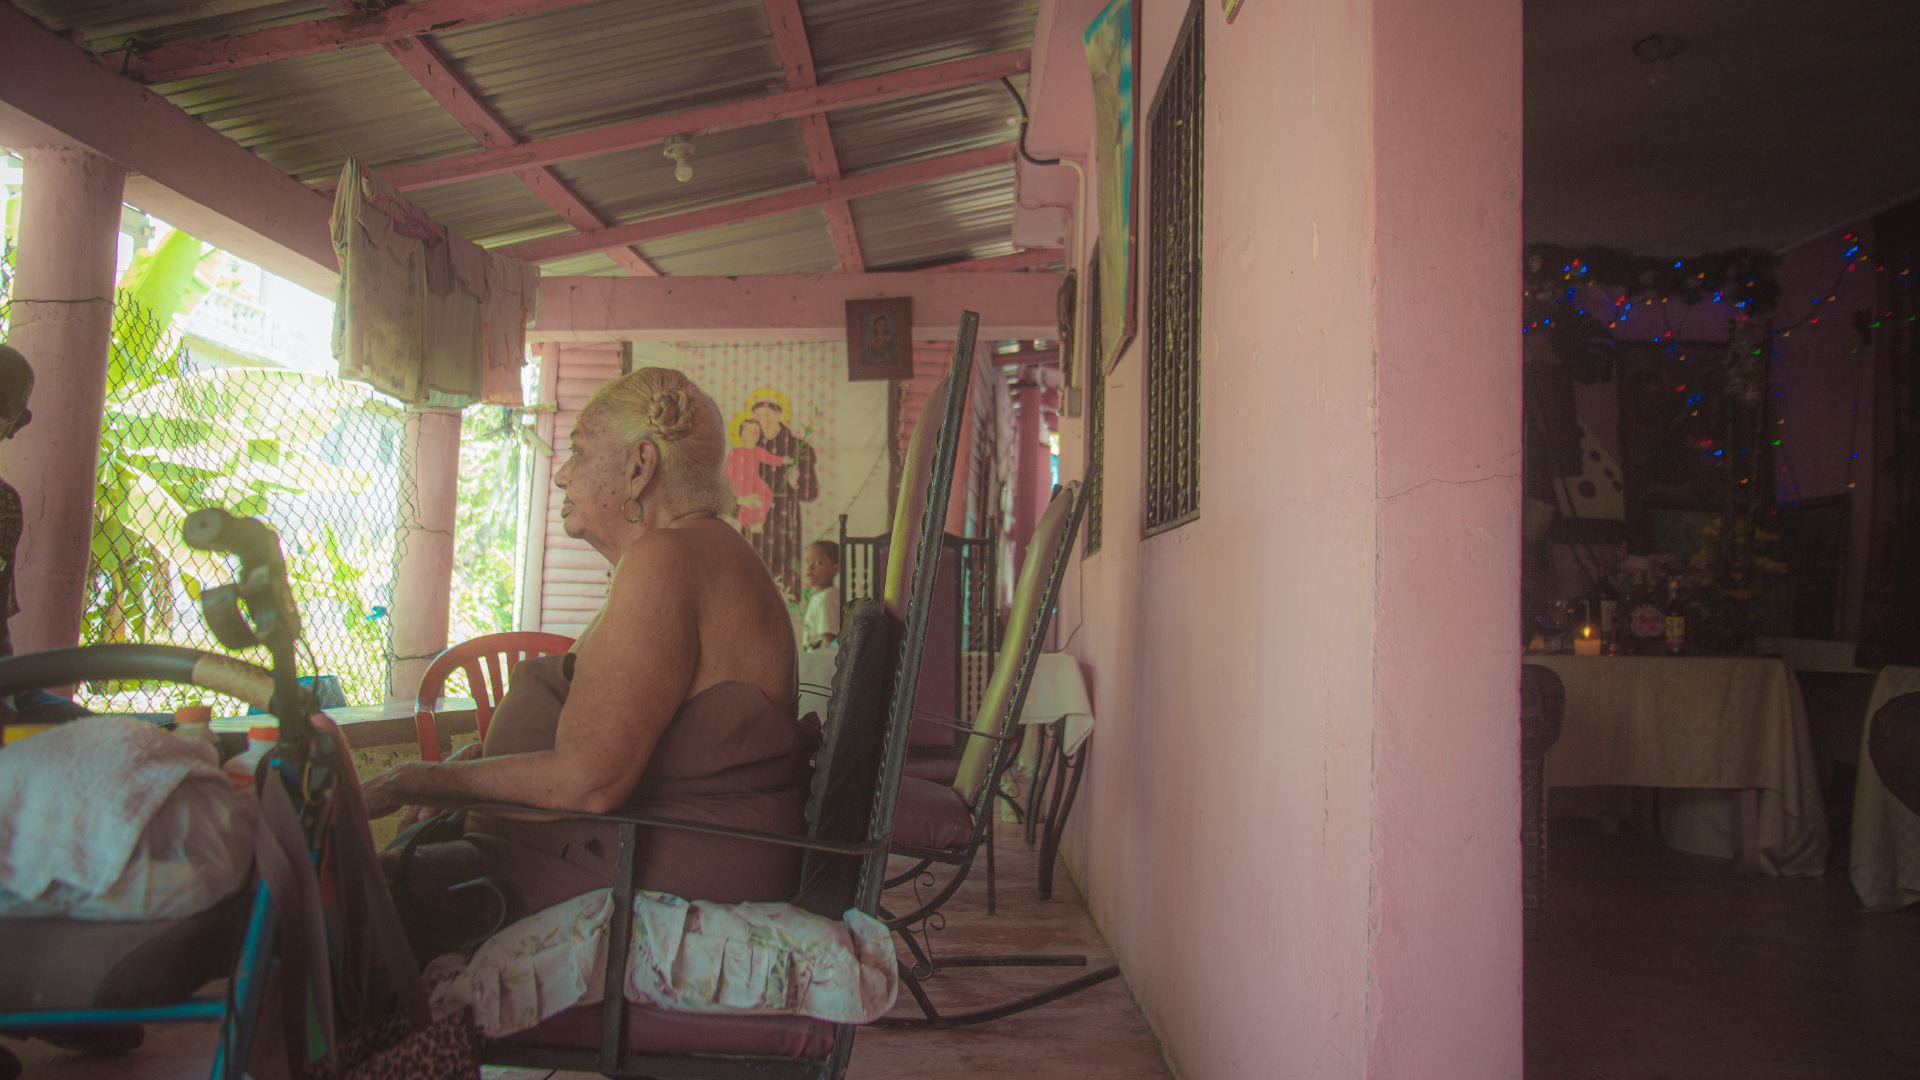 Graciela sits at a table facing away from the camera, outside of her home with bright pink walls.